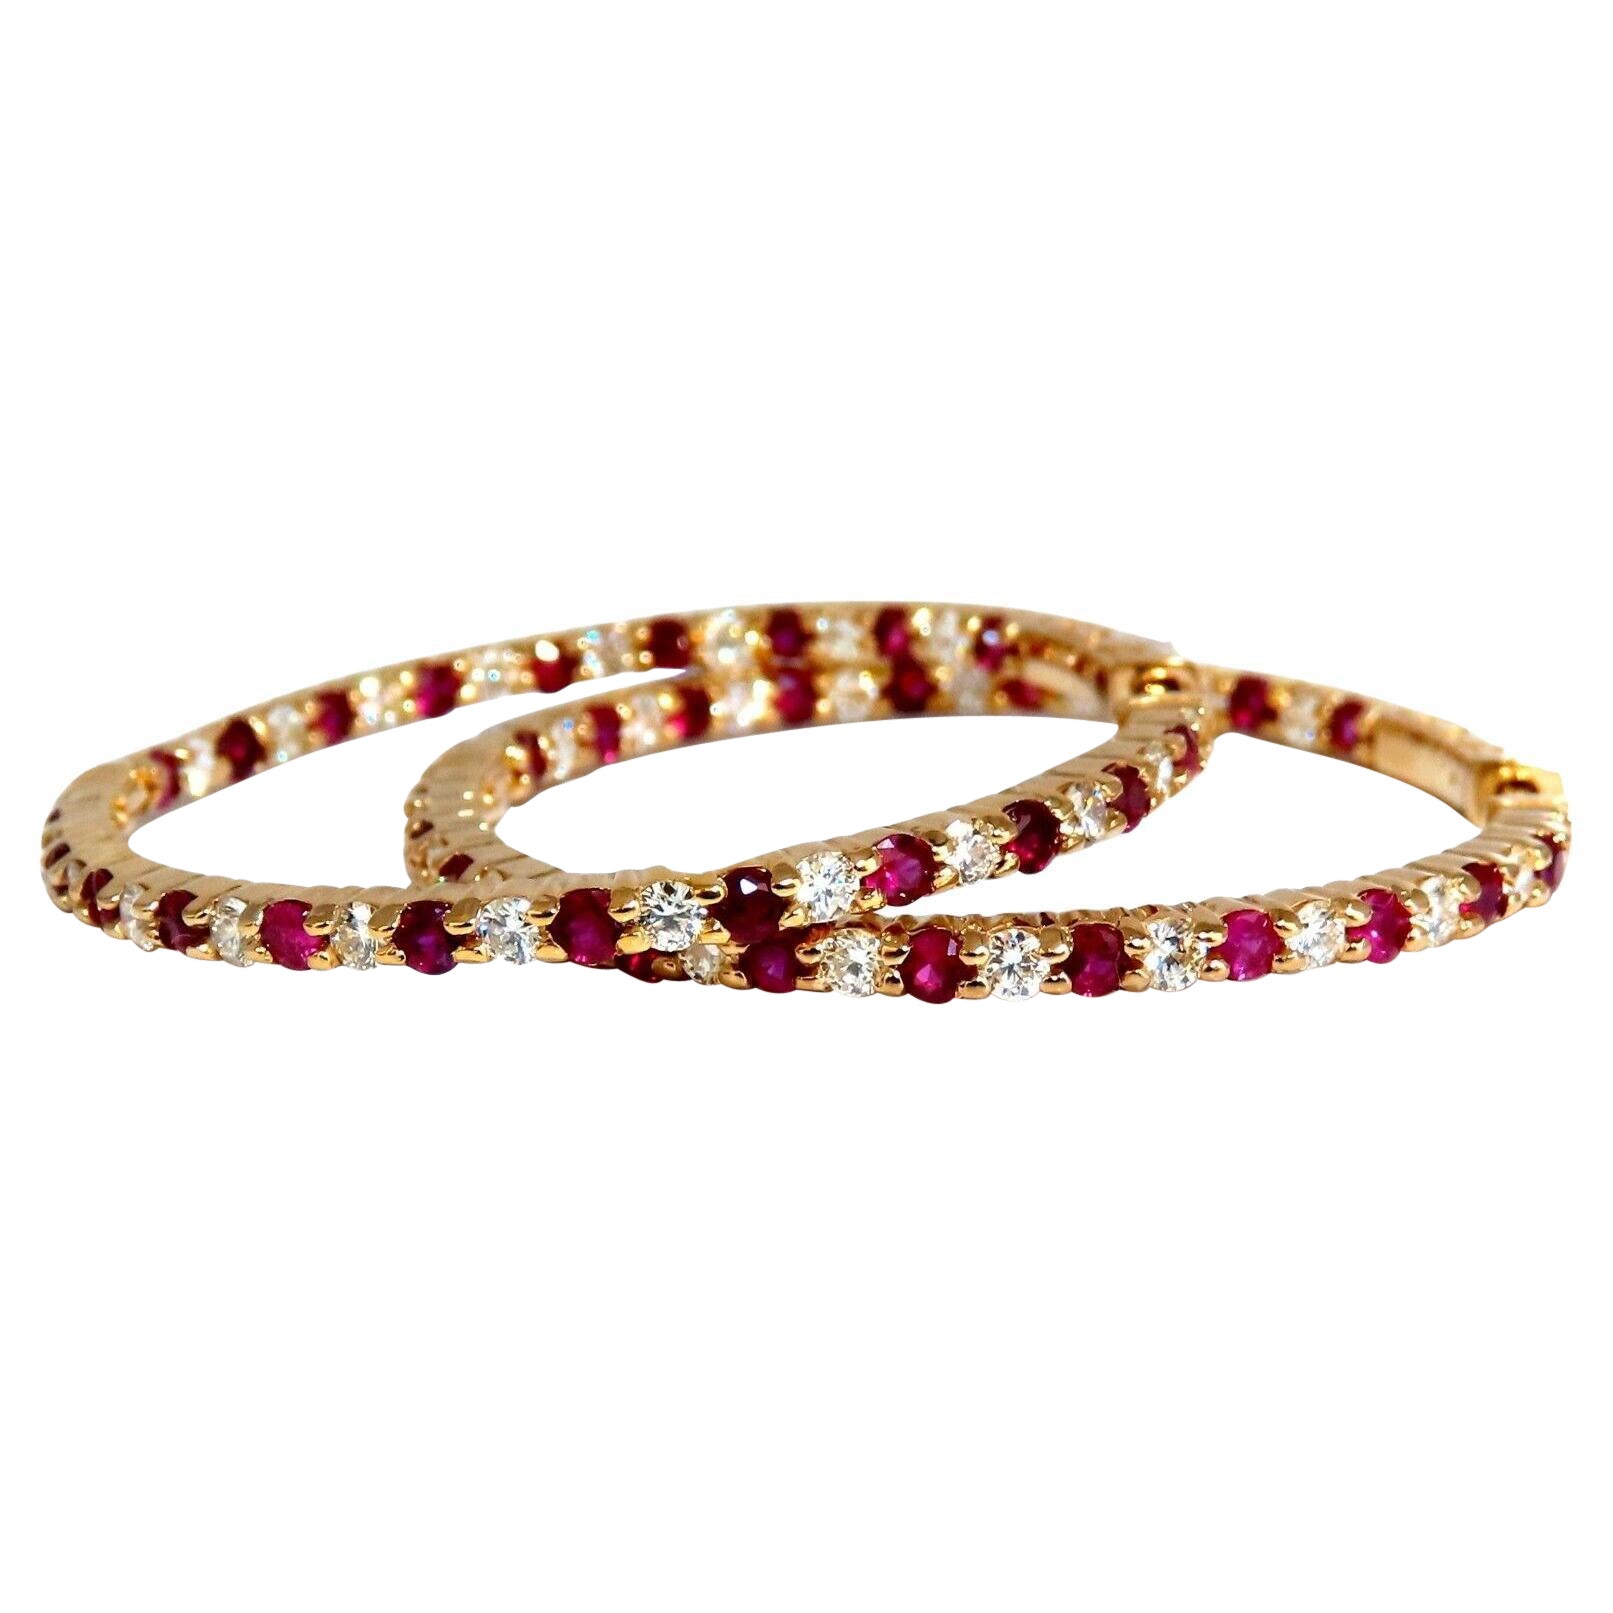 4.80ct Natural Ruby Diamonds Hoop Earrings 14kt Yellow Gold Inside Out